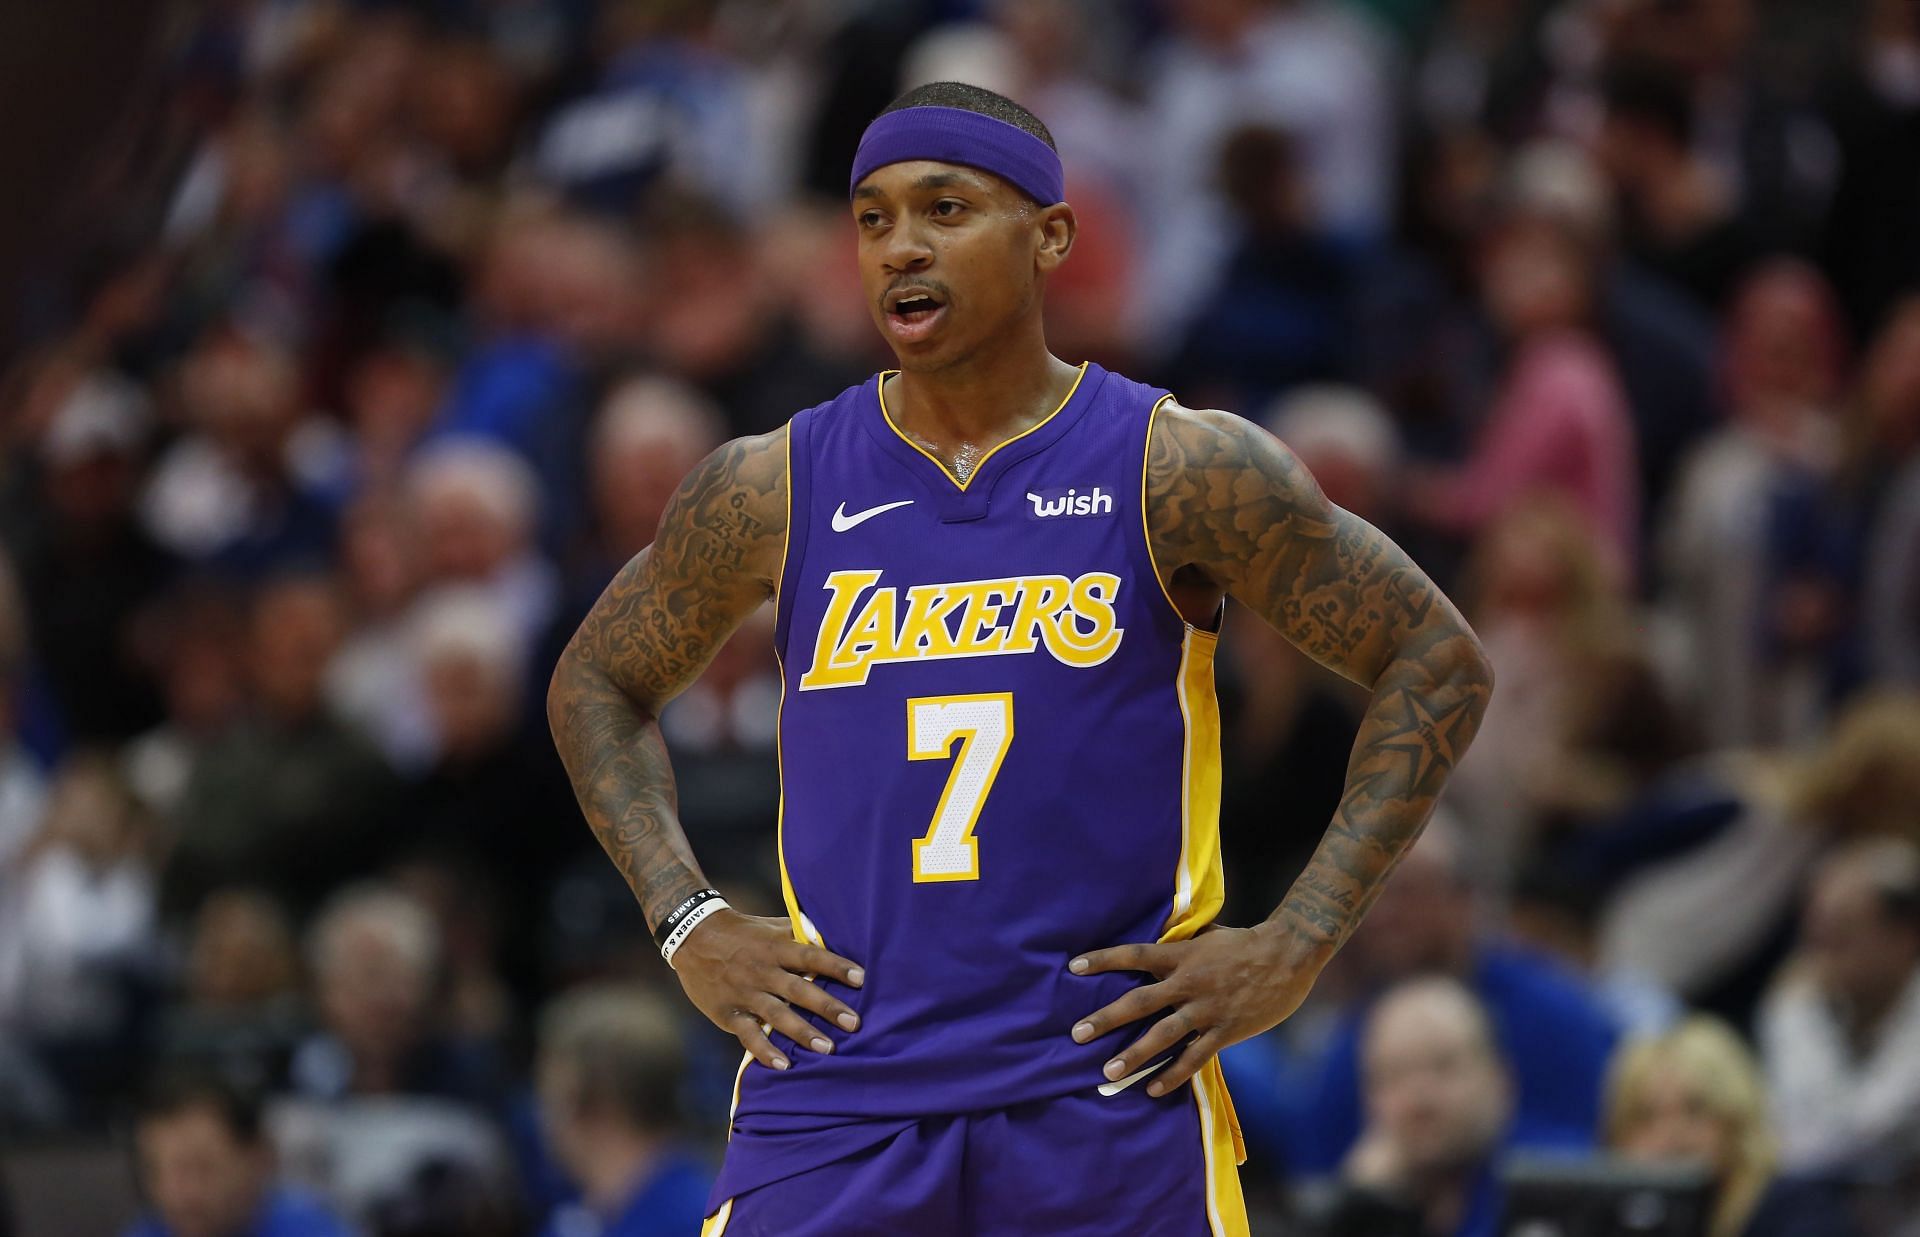 Isaiah Thomas #7 of the Los Angeles Lakers reacts as the Lakers play the Dallas Mavericks in the second half at American Airlines Center on February 10, 2018 in Dallas, Texas. The Mavericks won 130-123.